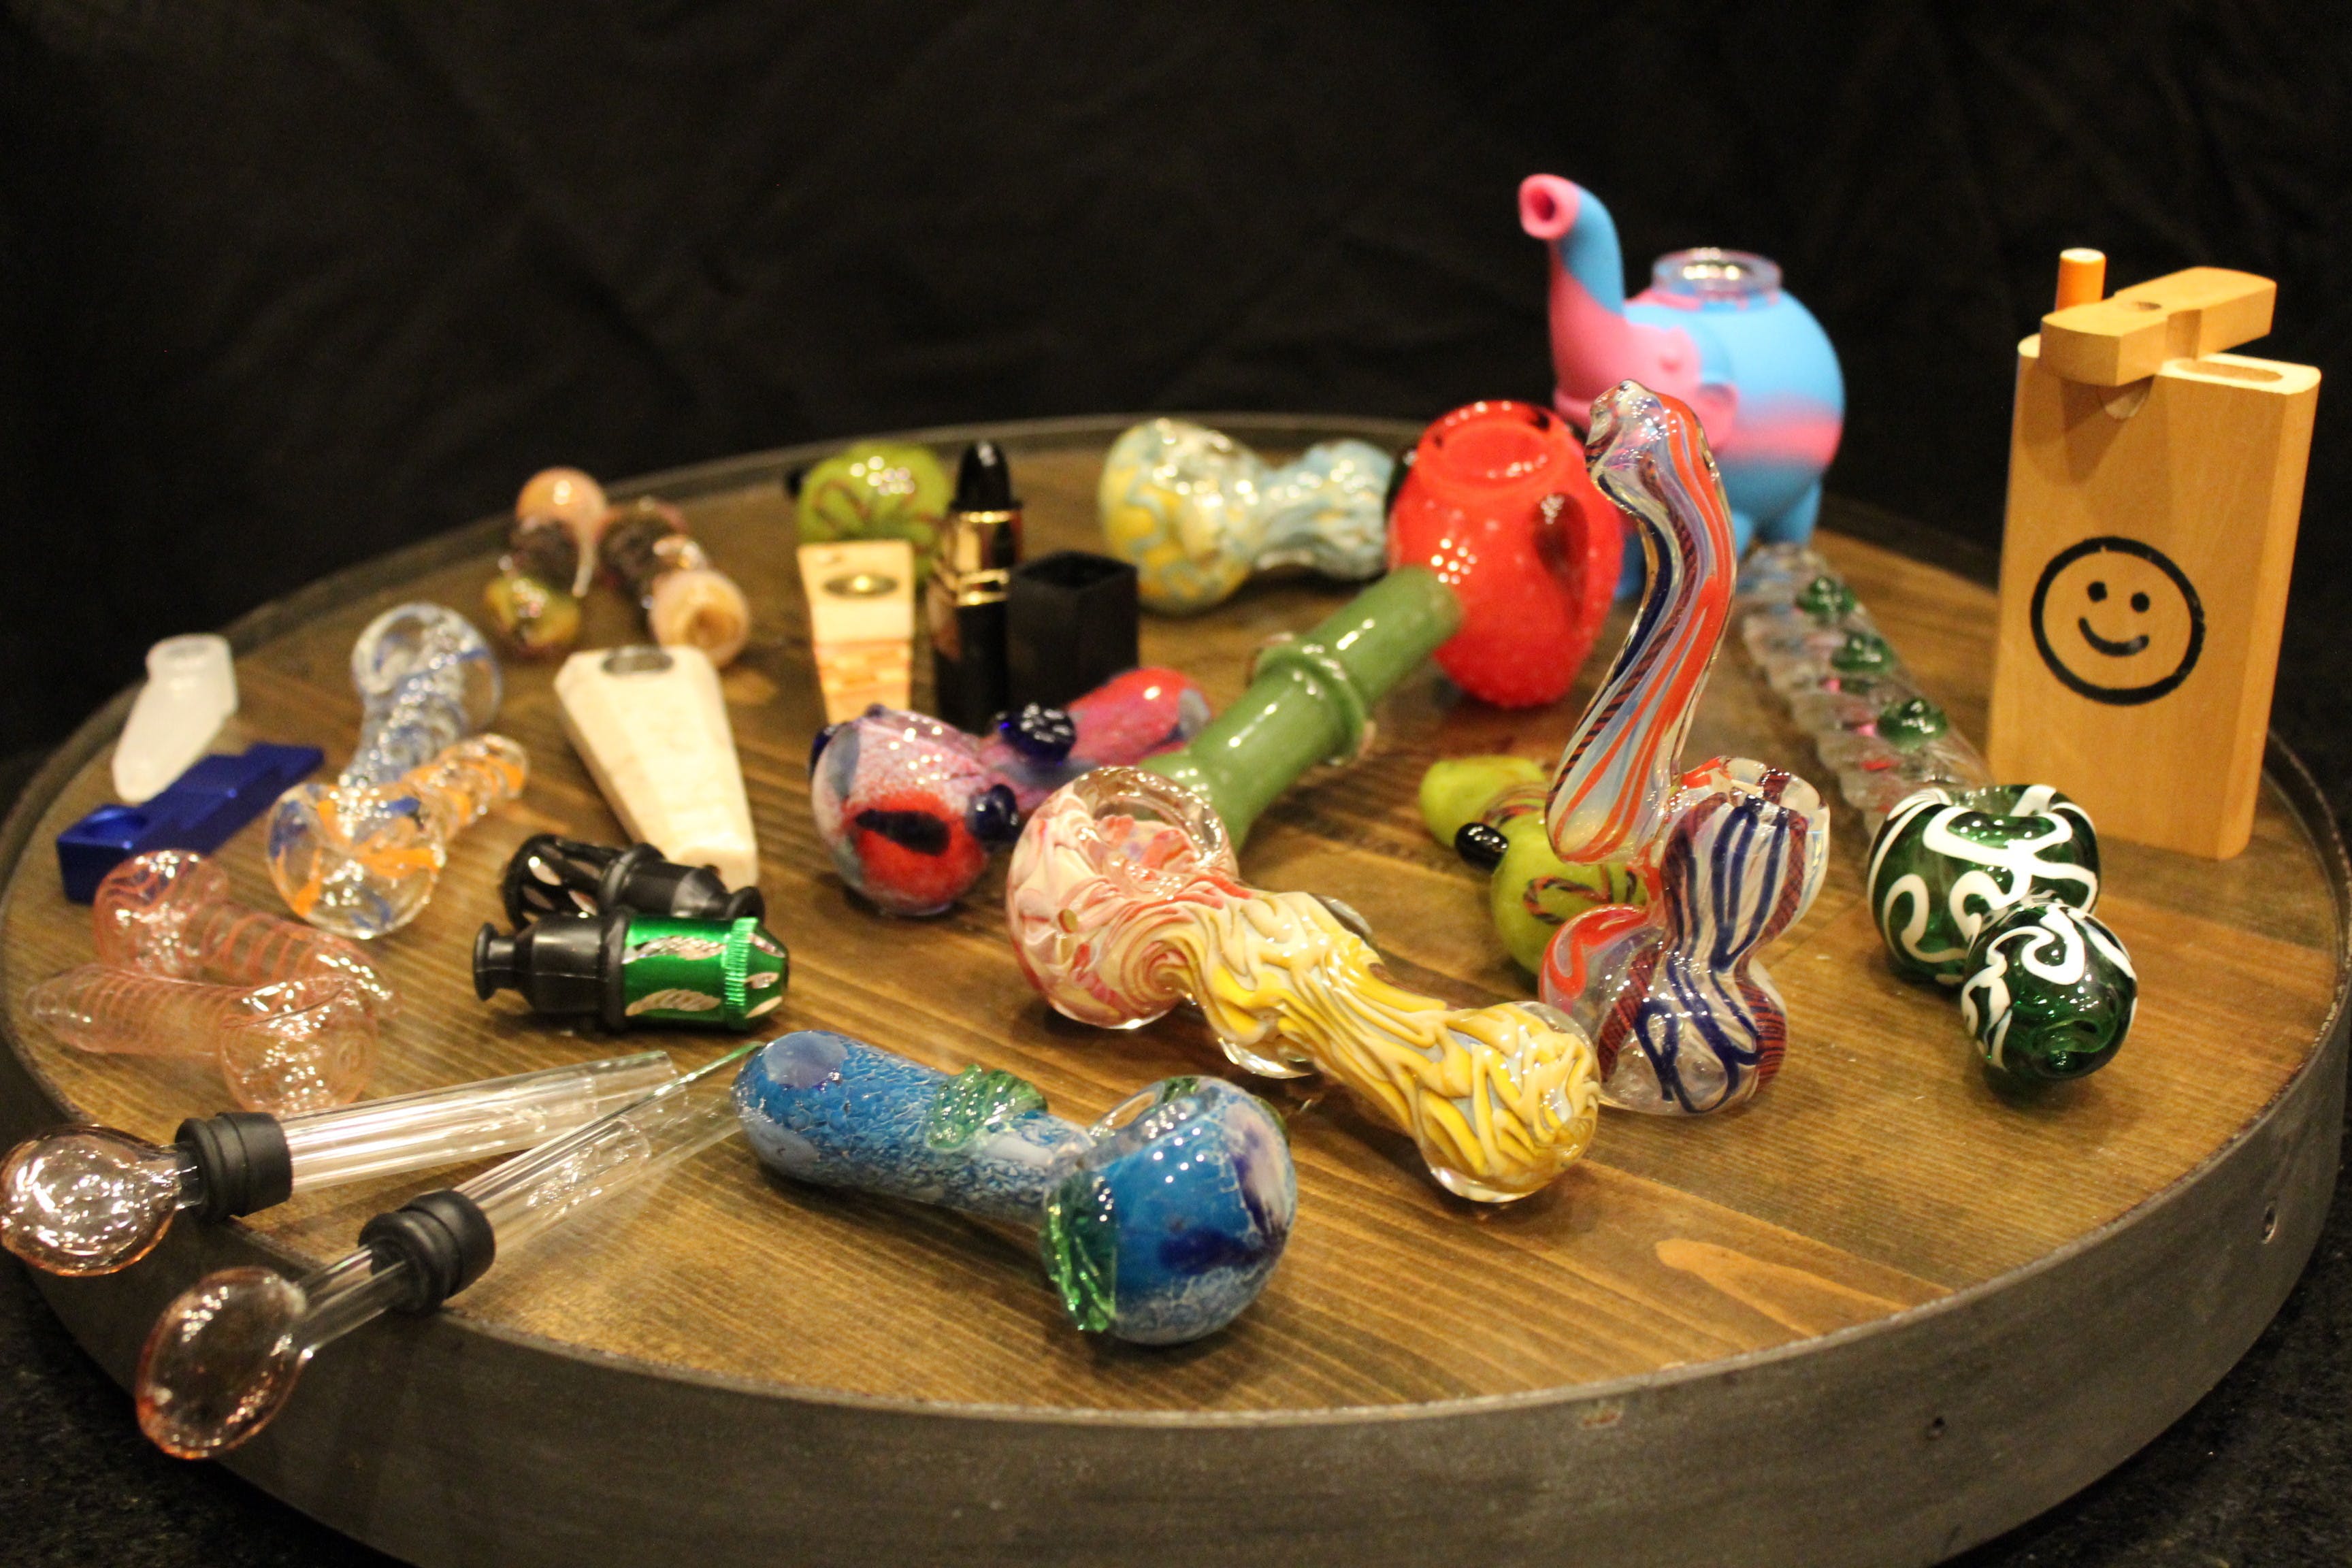 gear-pipes-2c-bubblers-and-other-smoking-accessories